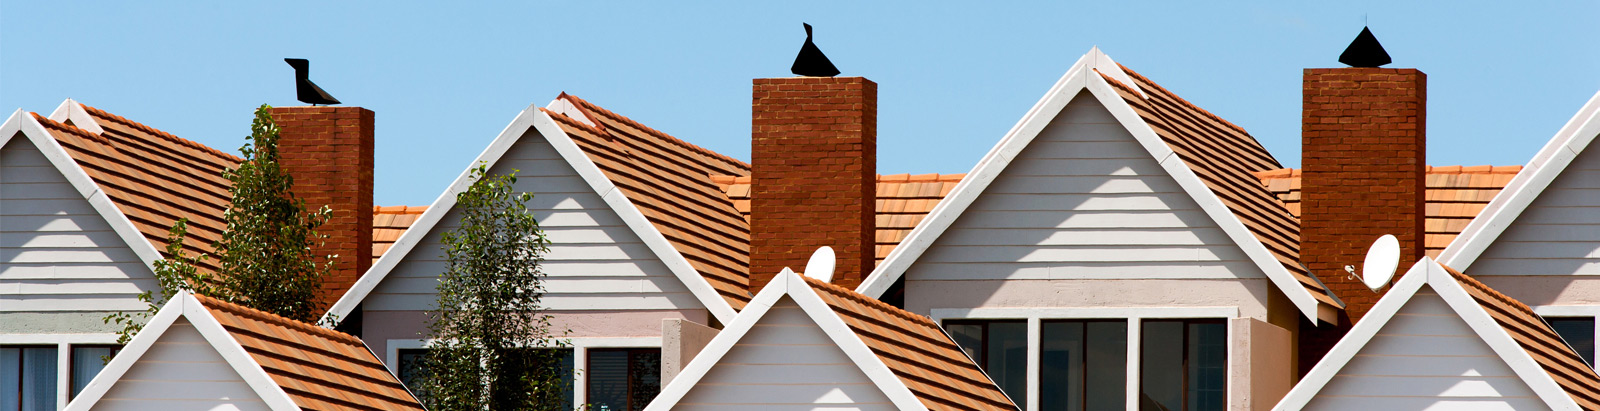 Brown tiled roofs with chimney